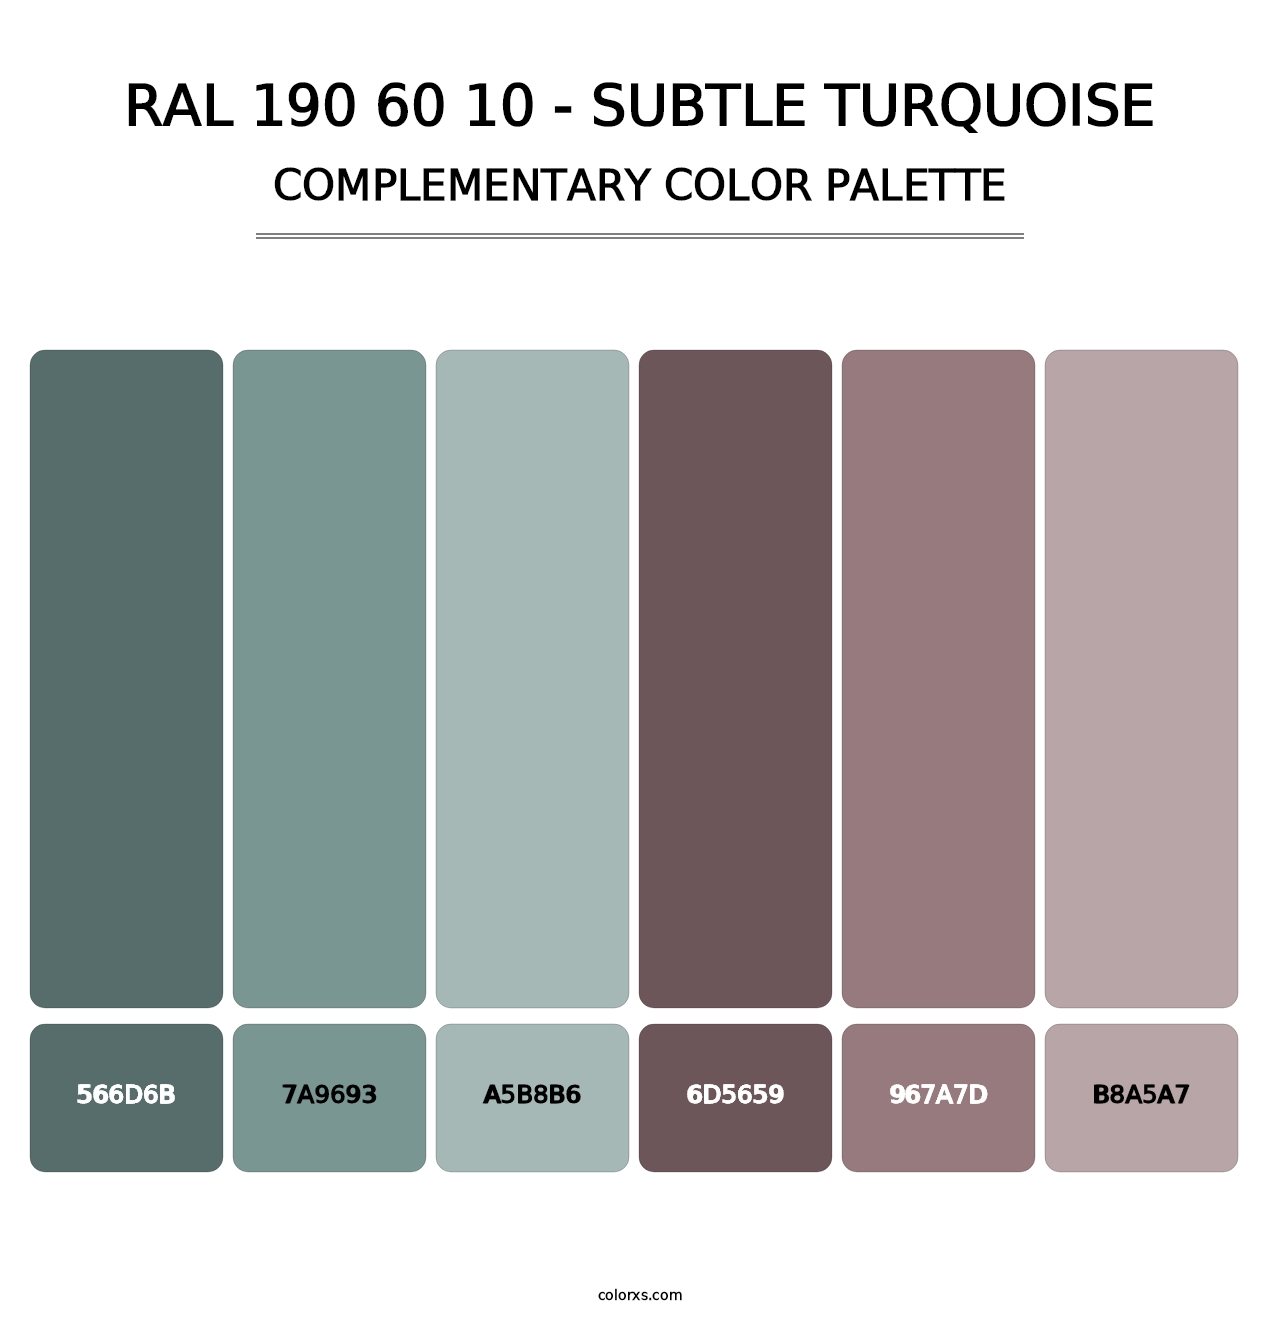 RAL 190 60 10 - Subtle Turquoise - Complementary Color Palette